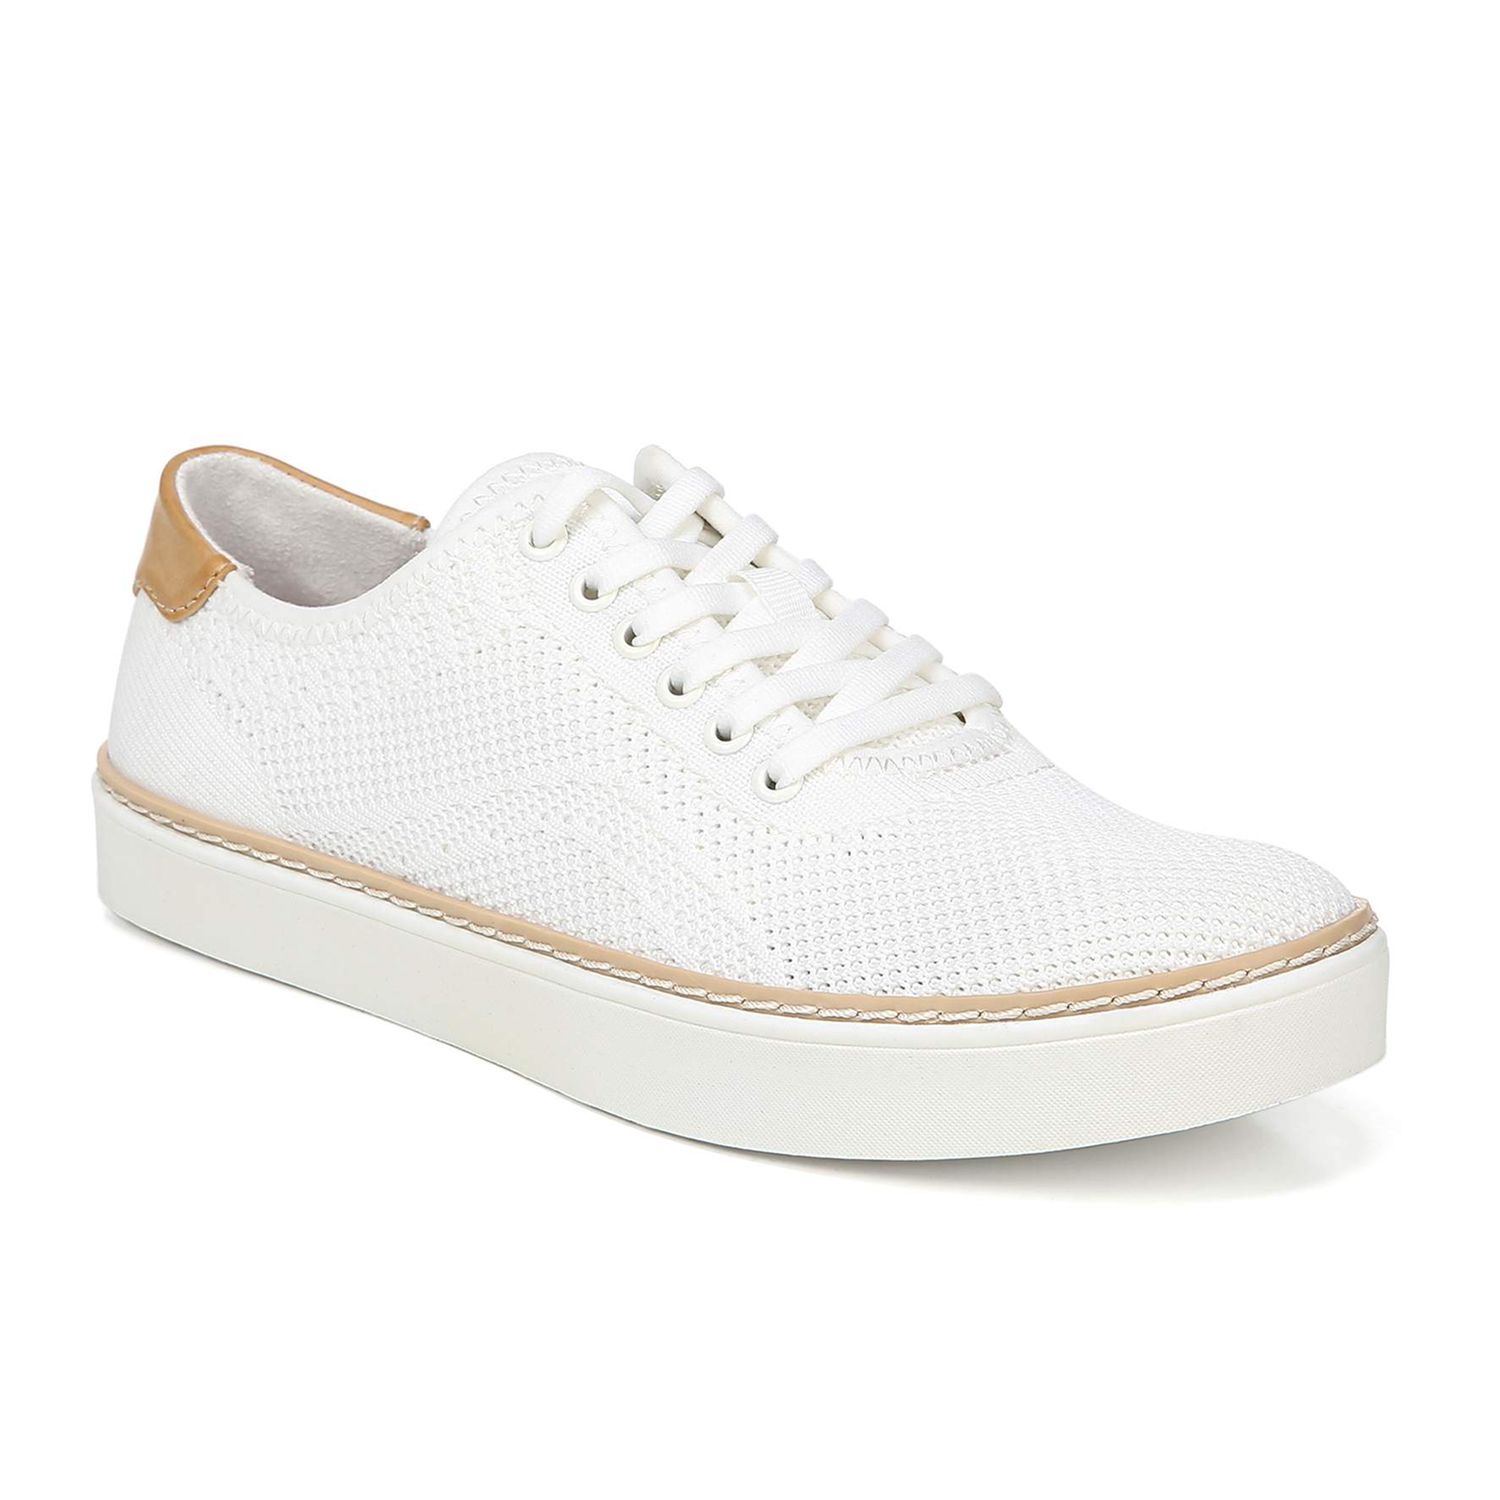 Madi Knit Up Womens' Slip-on Sneakers